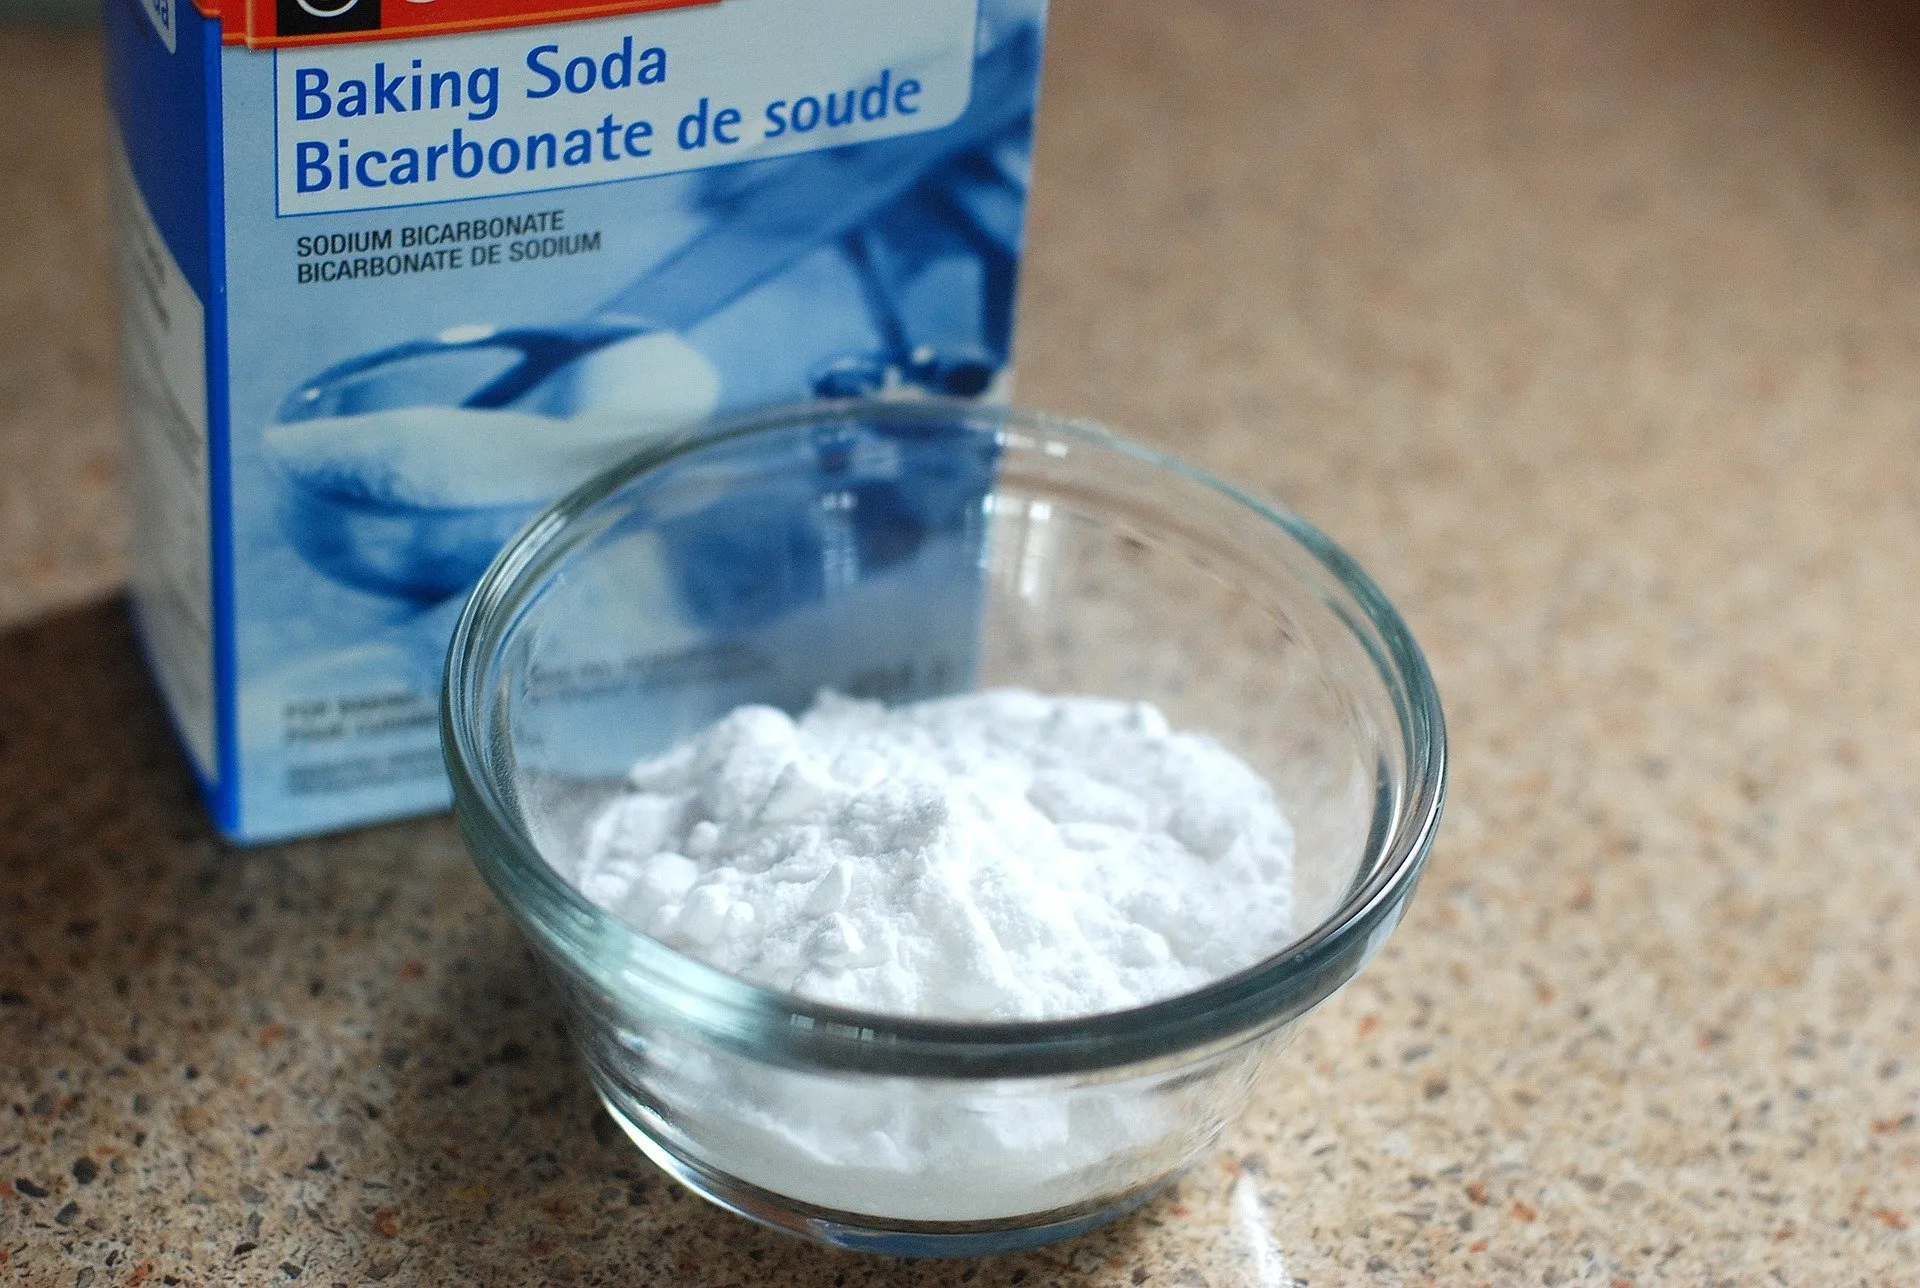 Baking soda enemas can empty and neutralize the acidity of the colon.